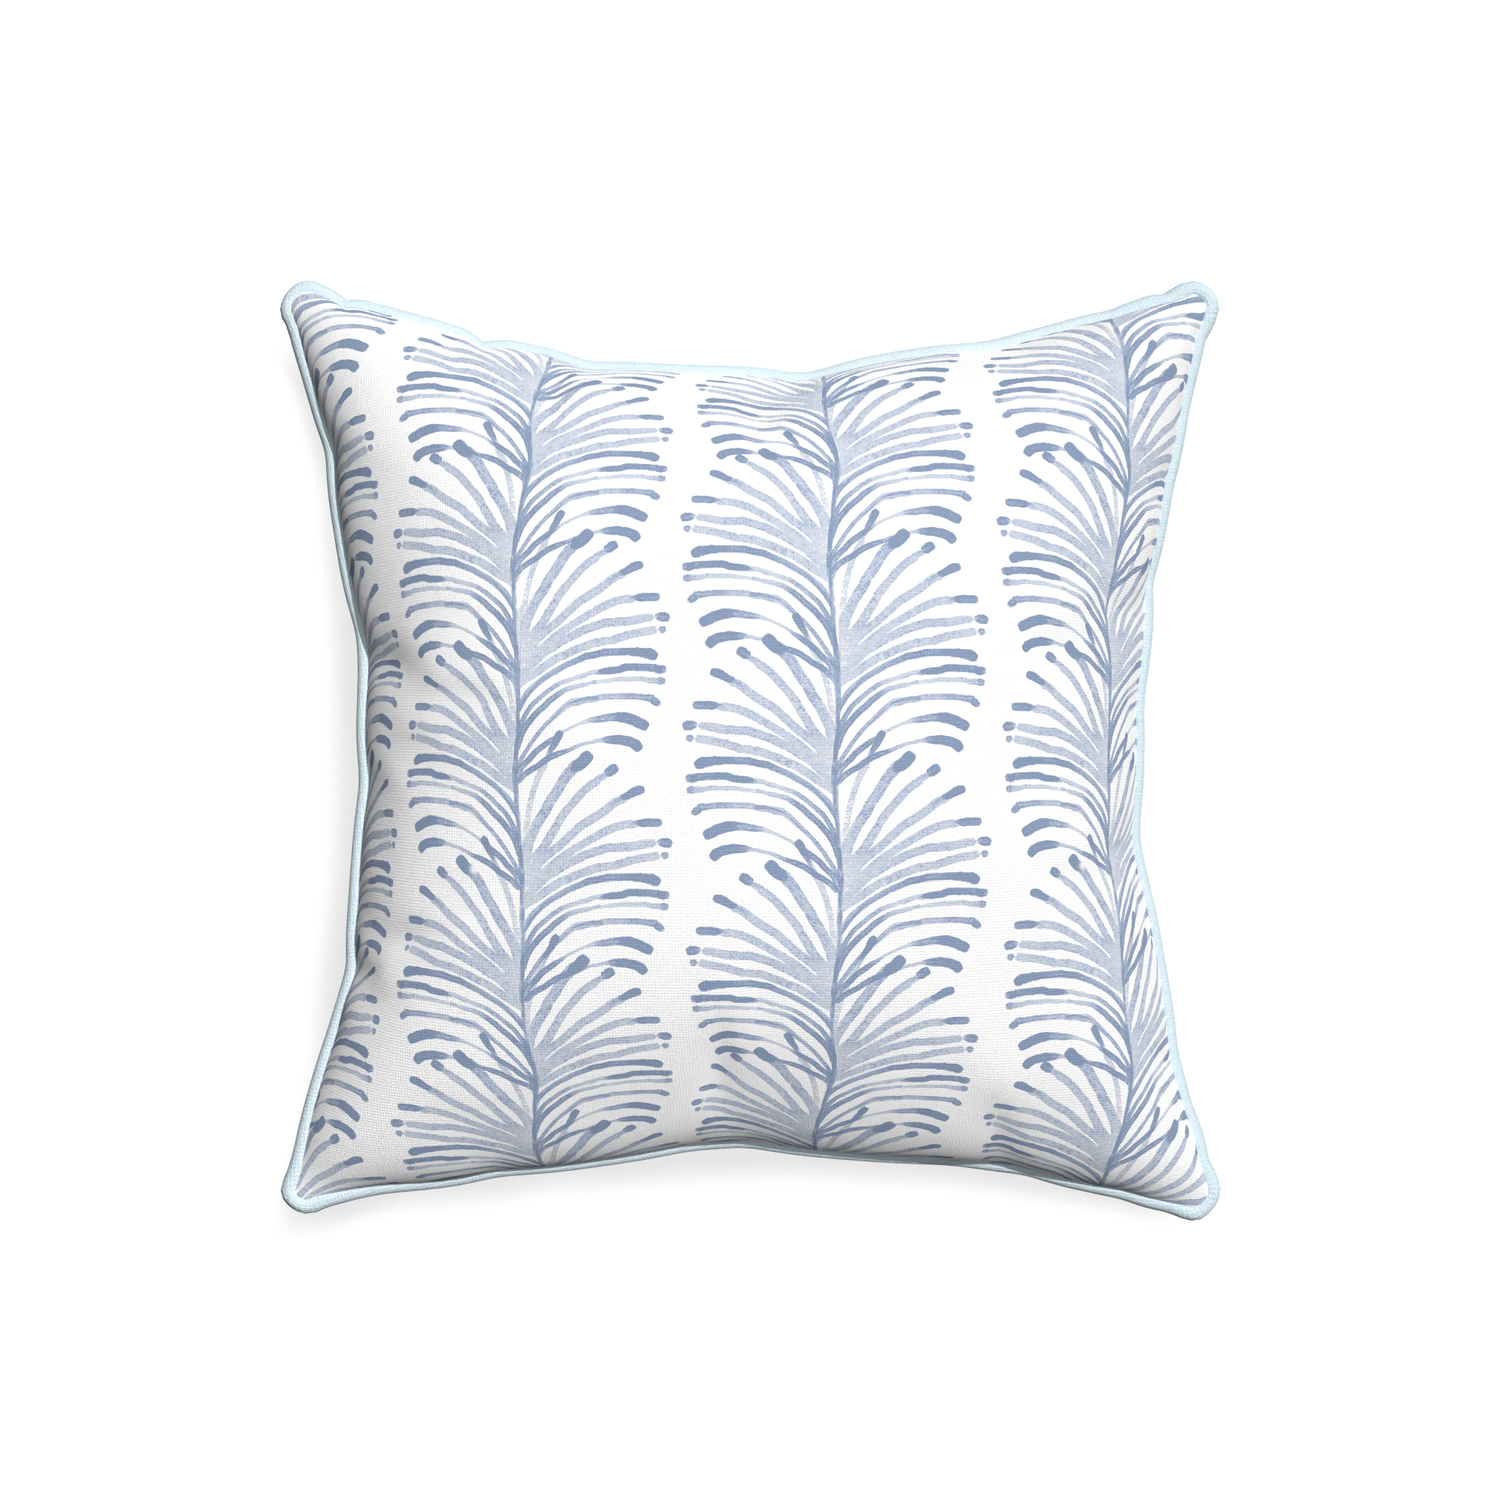 20-square emma sky custom pillow with powder piping on white background